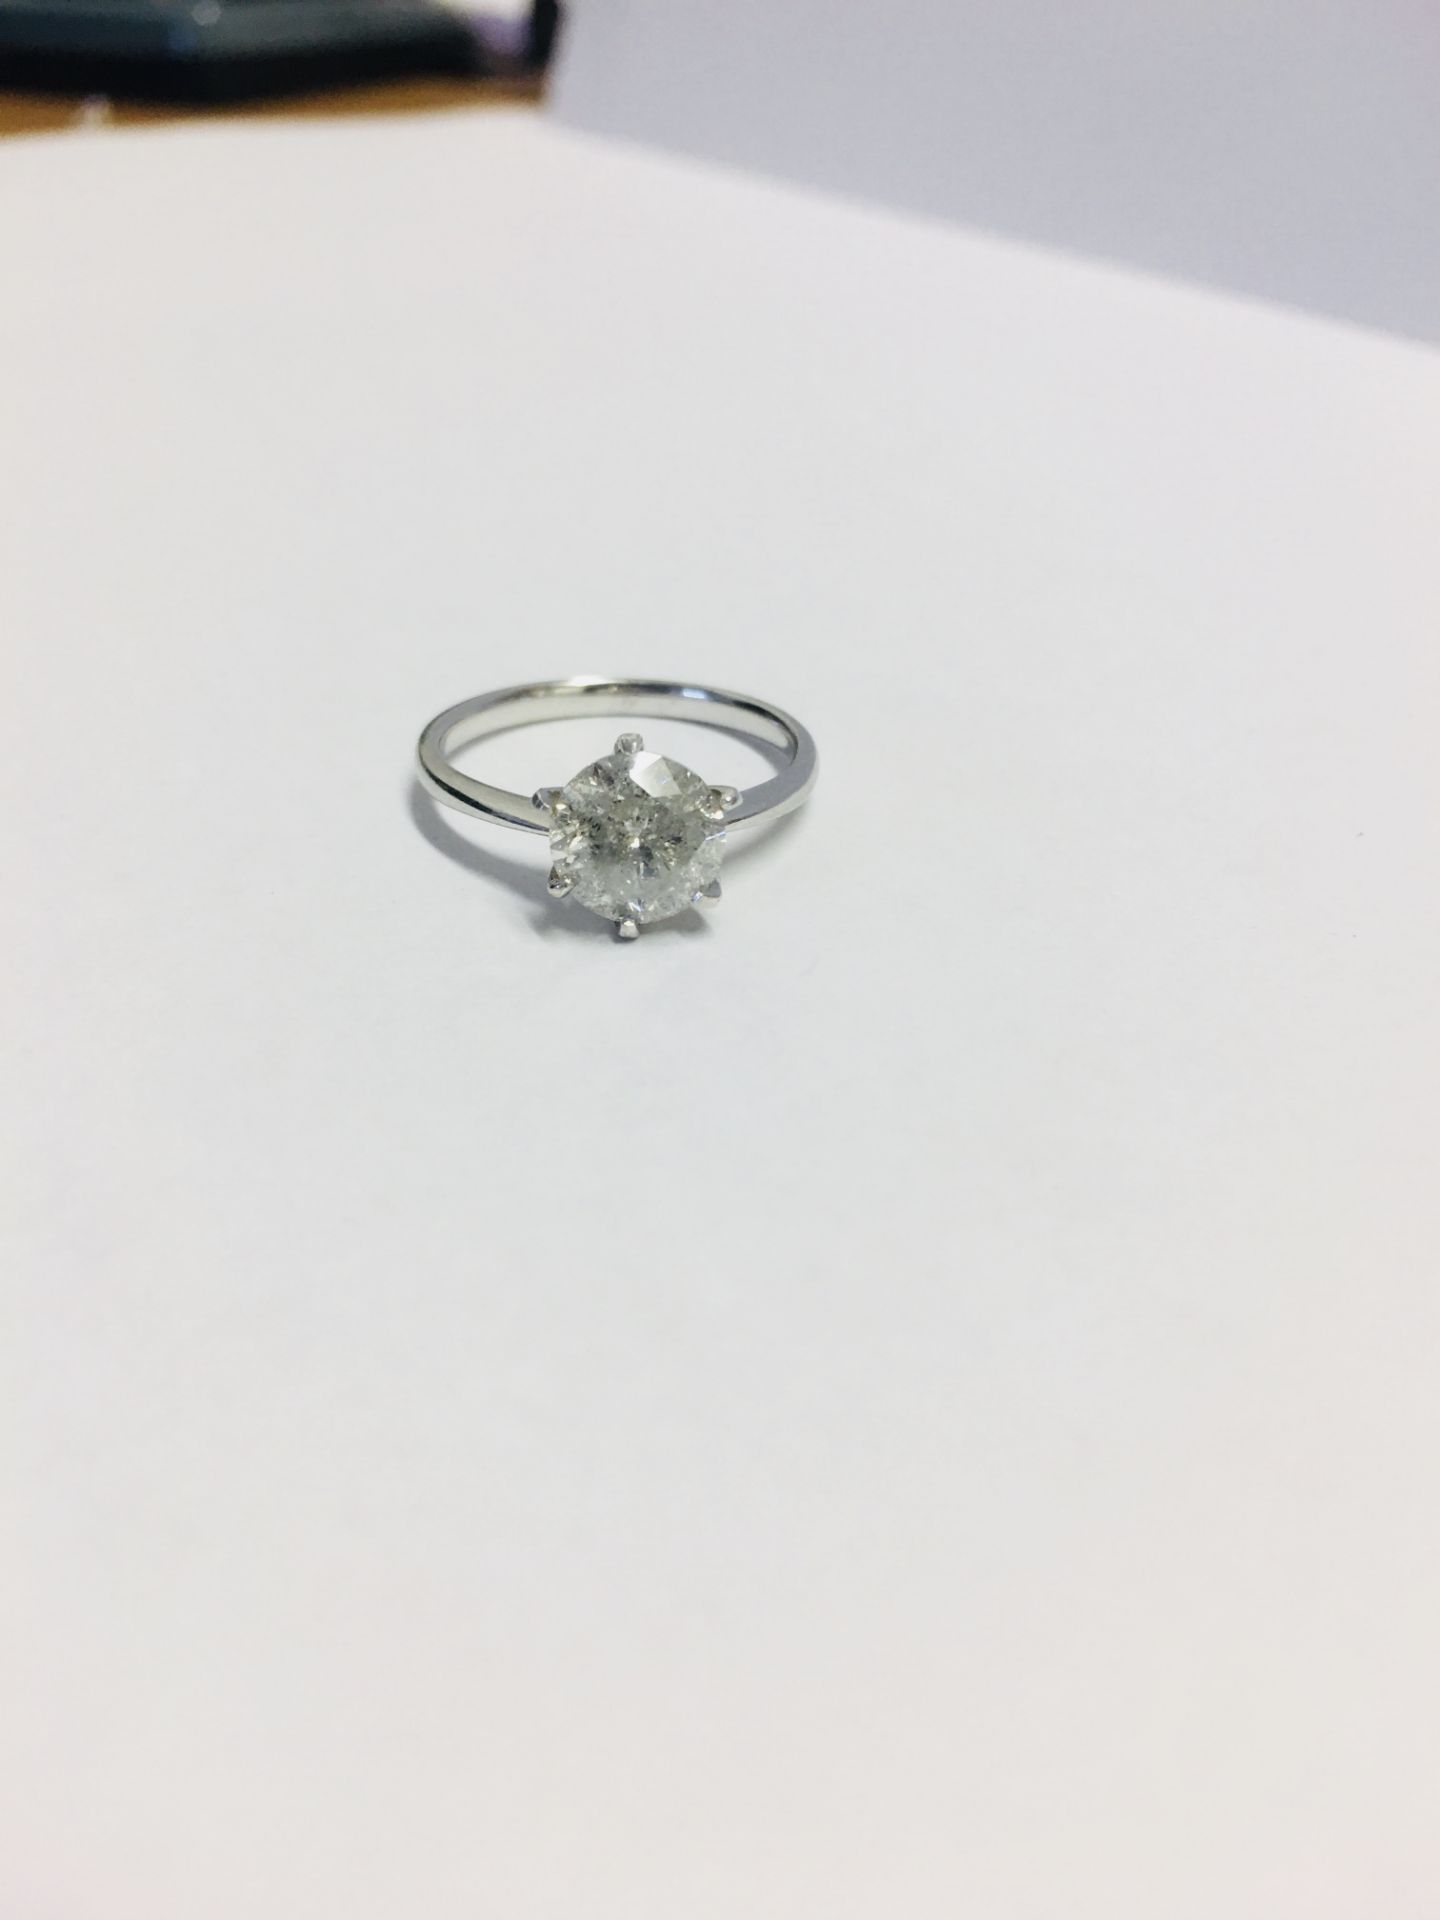 Diamond Solitaire Ring, - Image 6 of 6